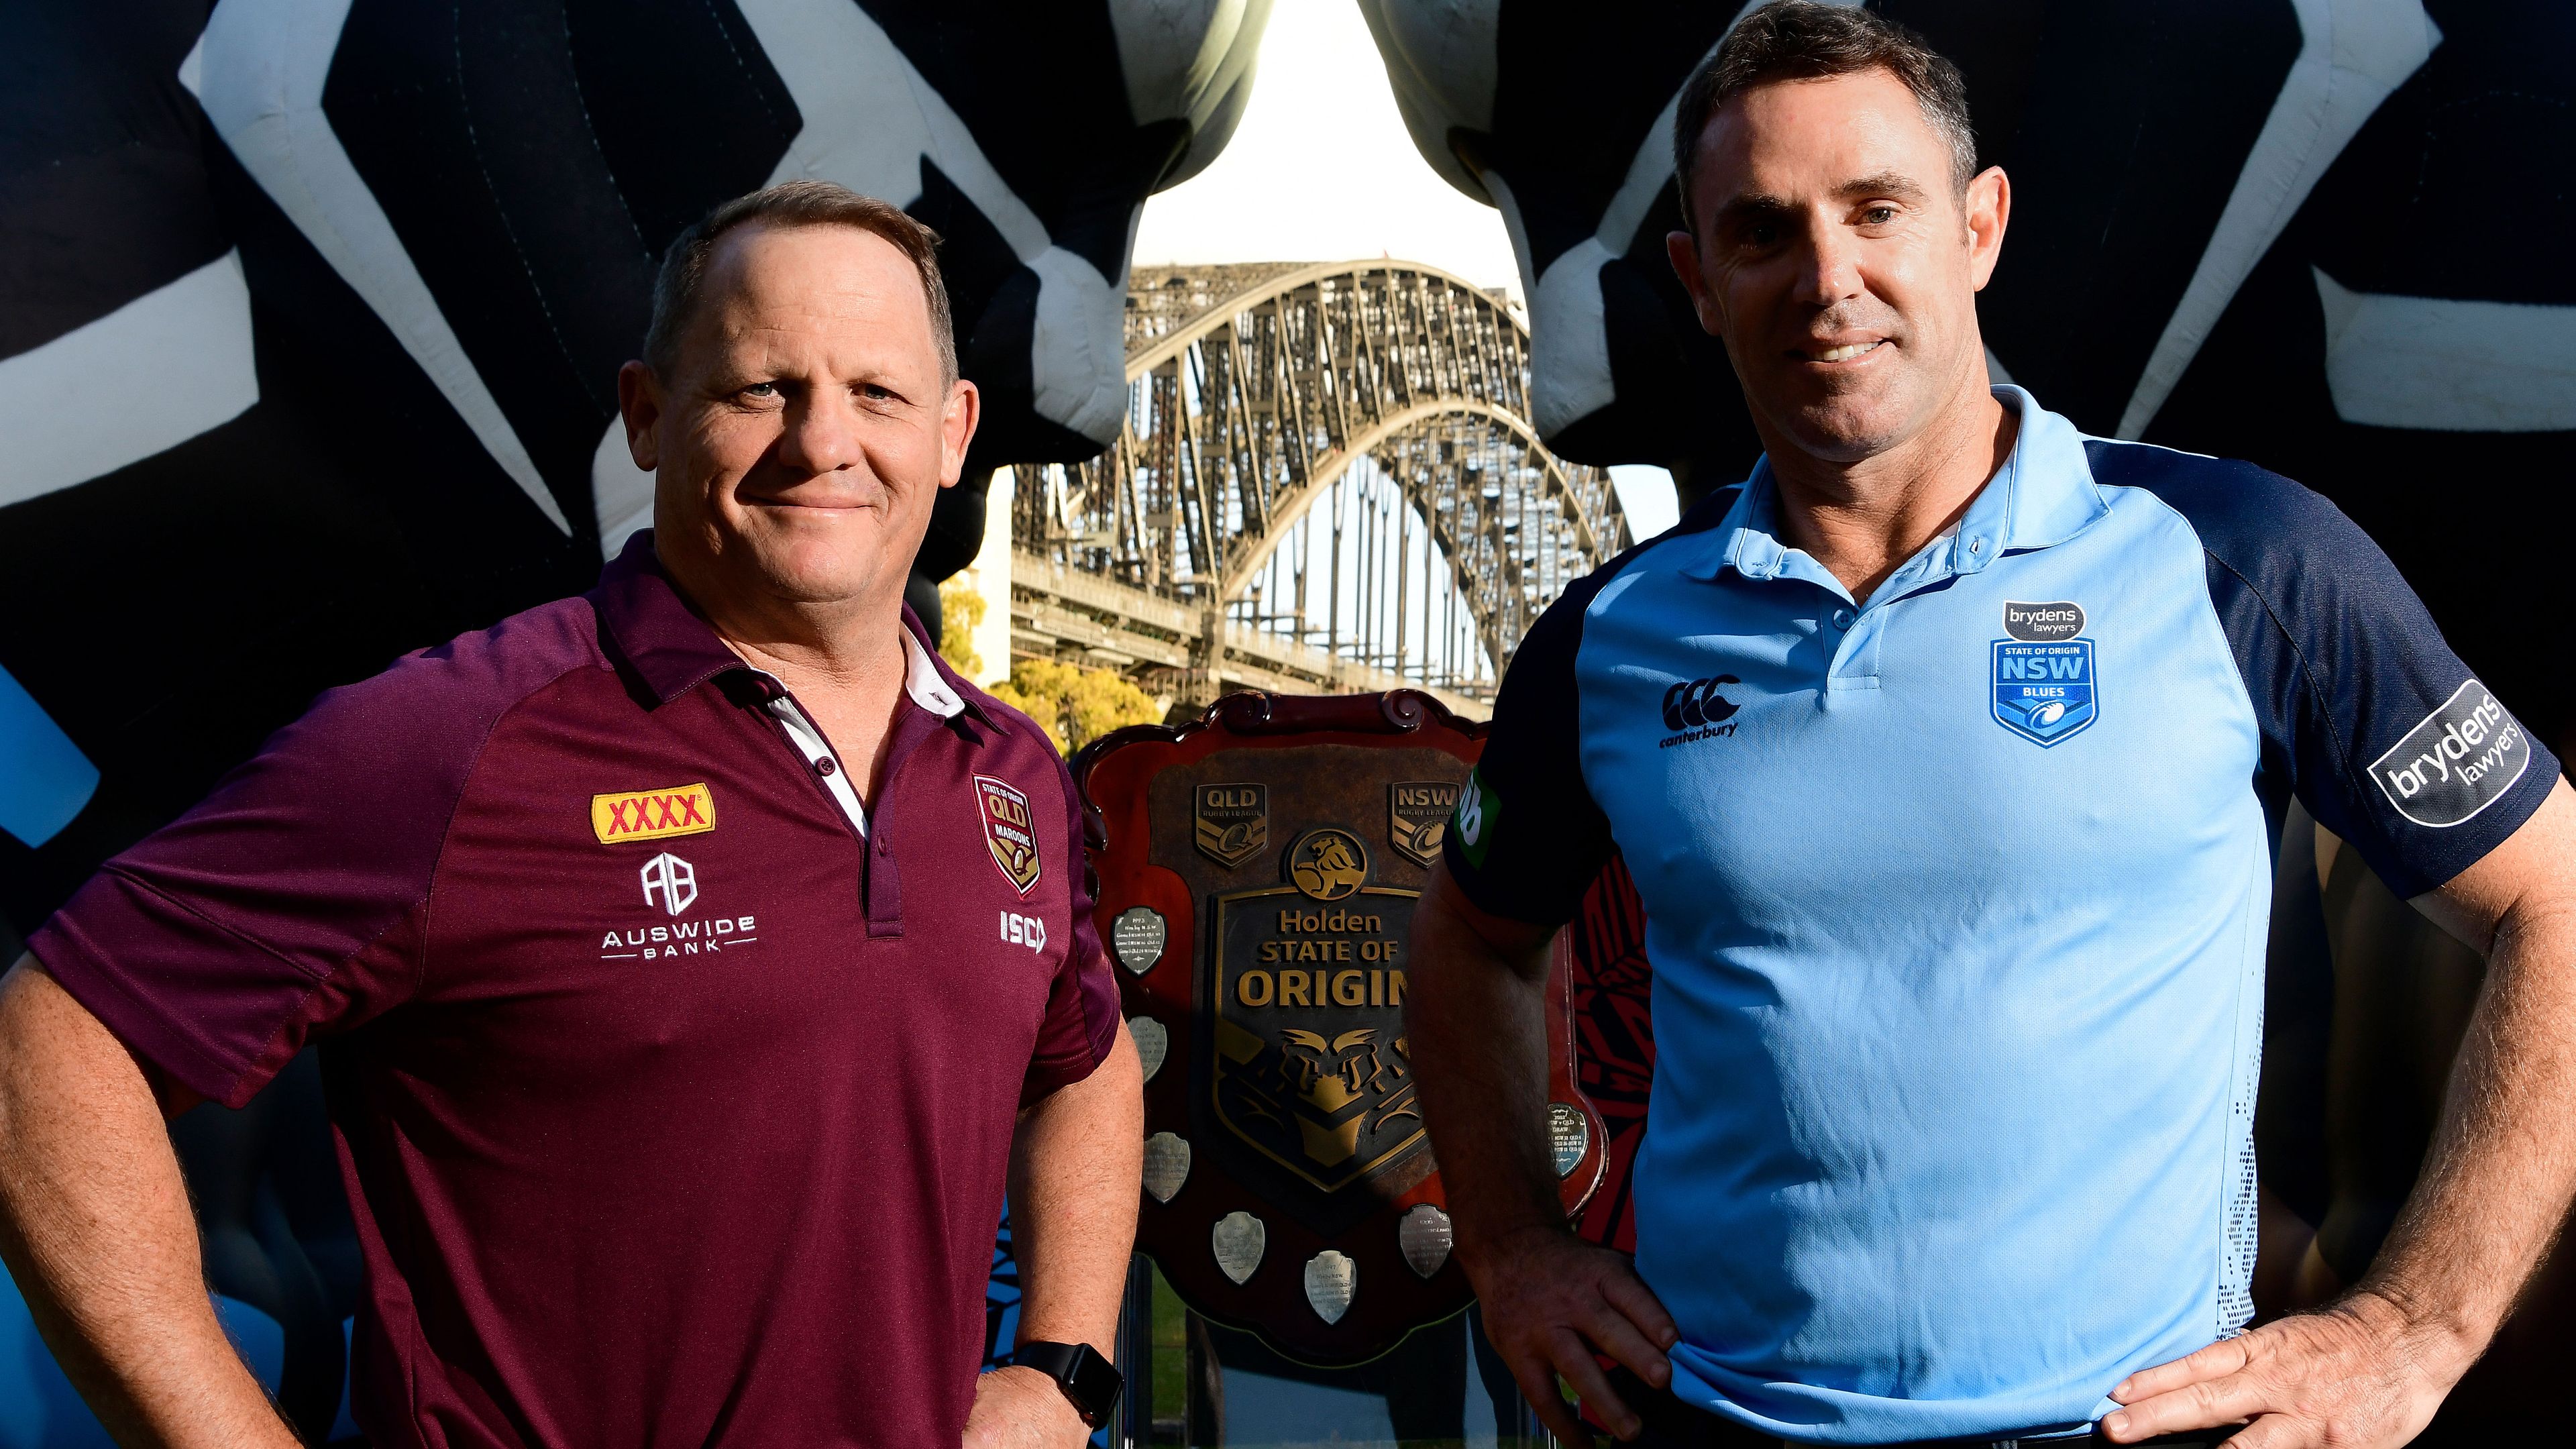 Free stream: How to watch State of Origin